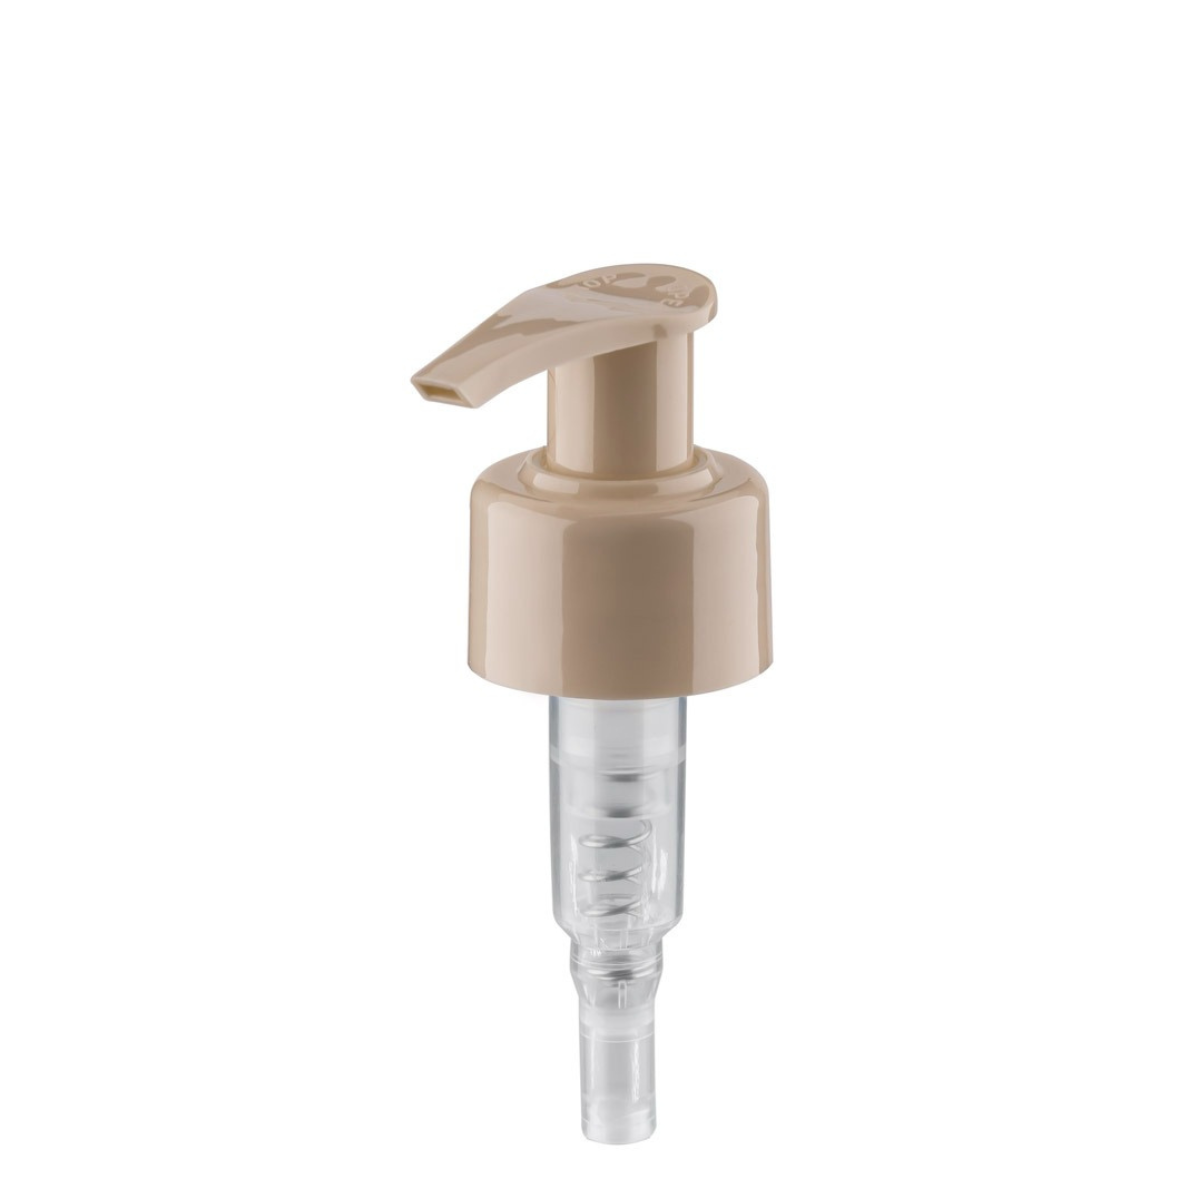 Dompel Pump valves, color brown, thread 28/410, made with stainless steel springs and glass balls, Model 303-A1. (Pump heads only, bottles not included) - depilcompany